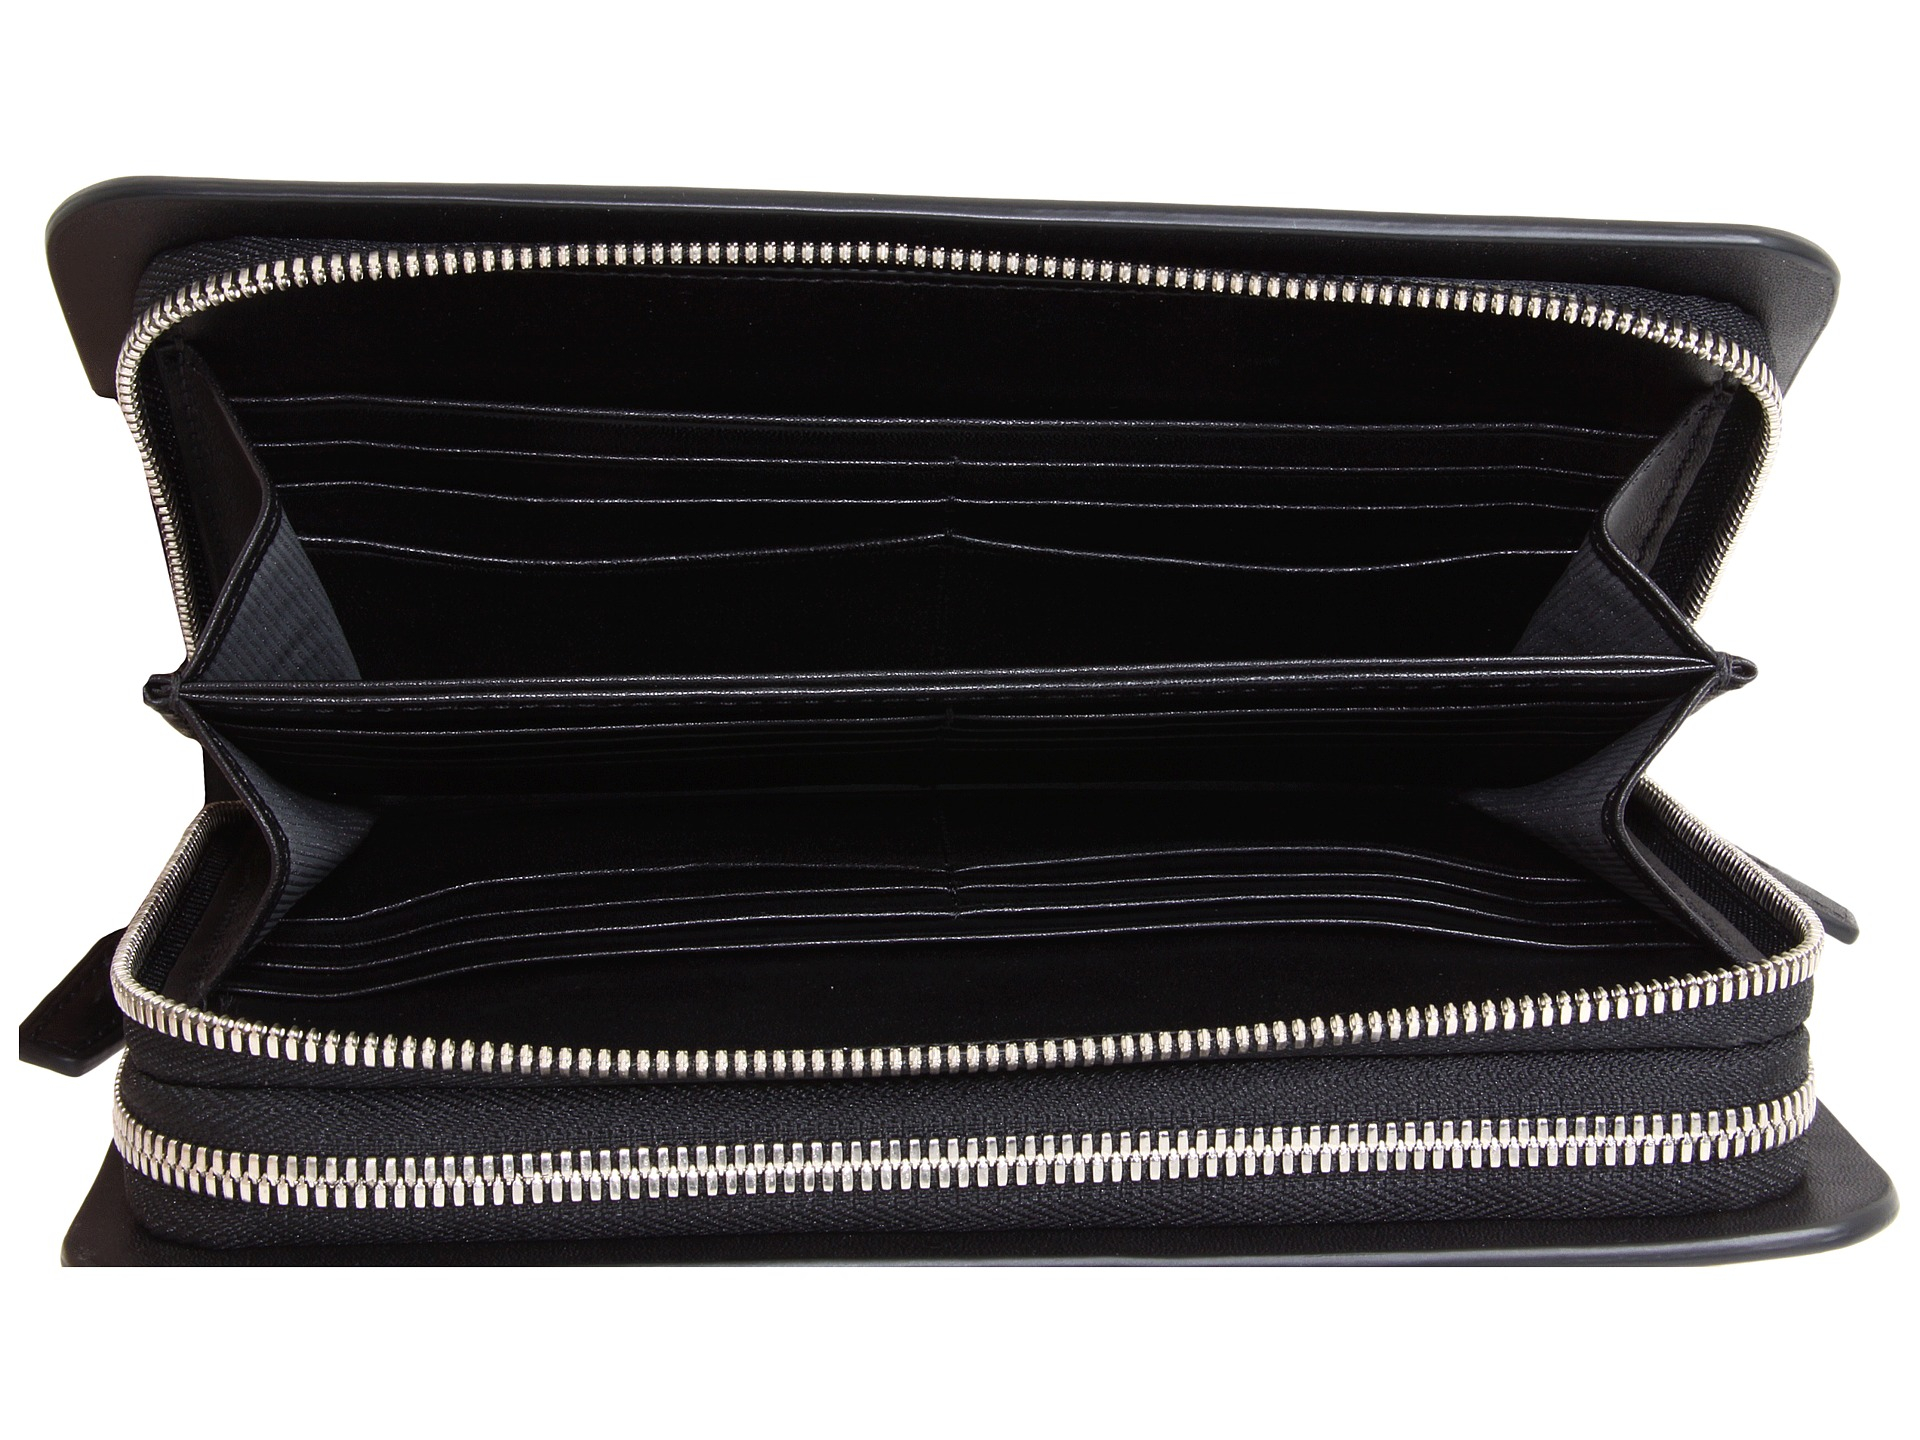 Tumi Bedford Executive Double Zip Around Leather Clutch in Black - Lyst